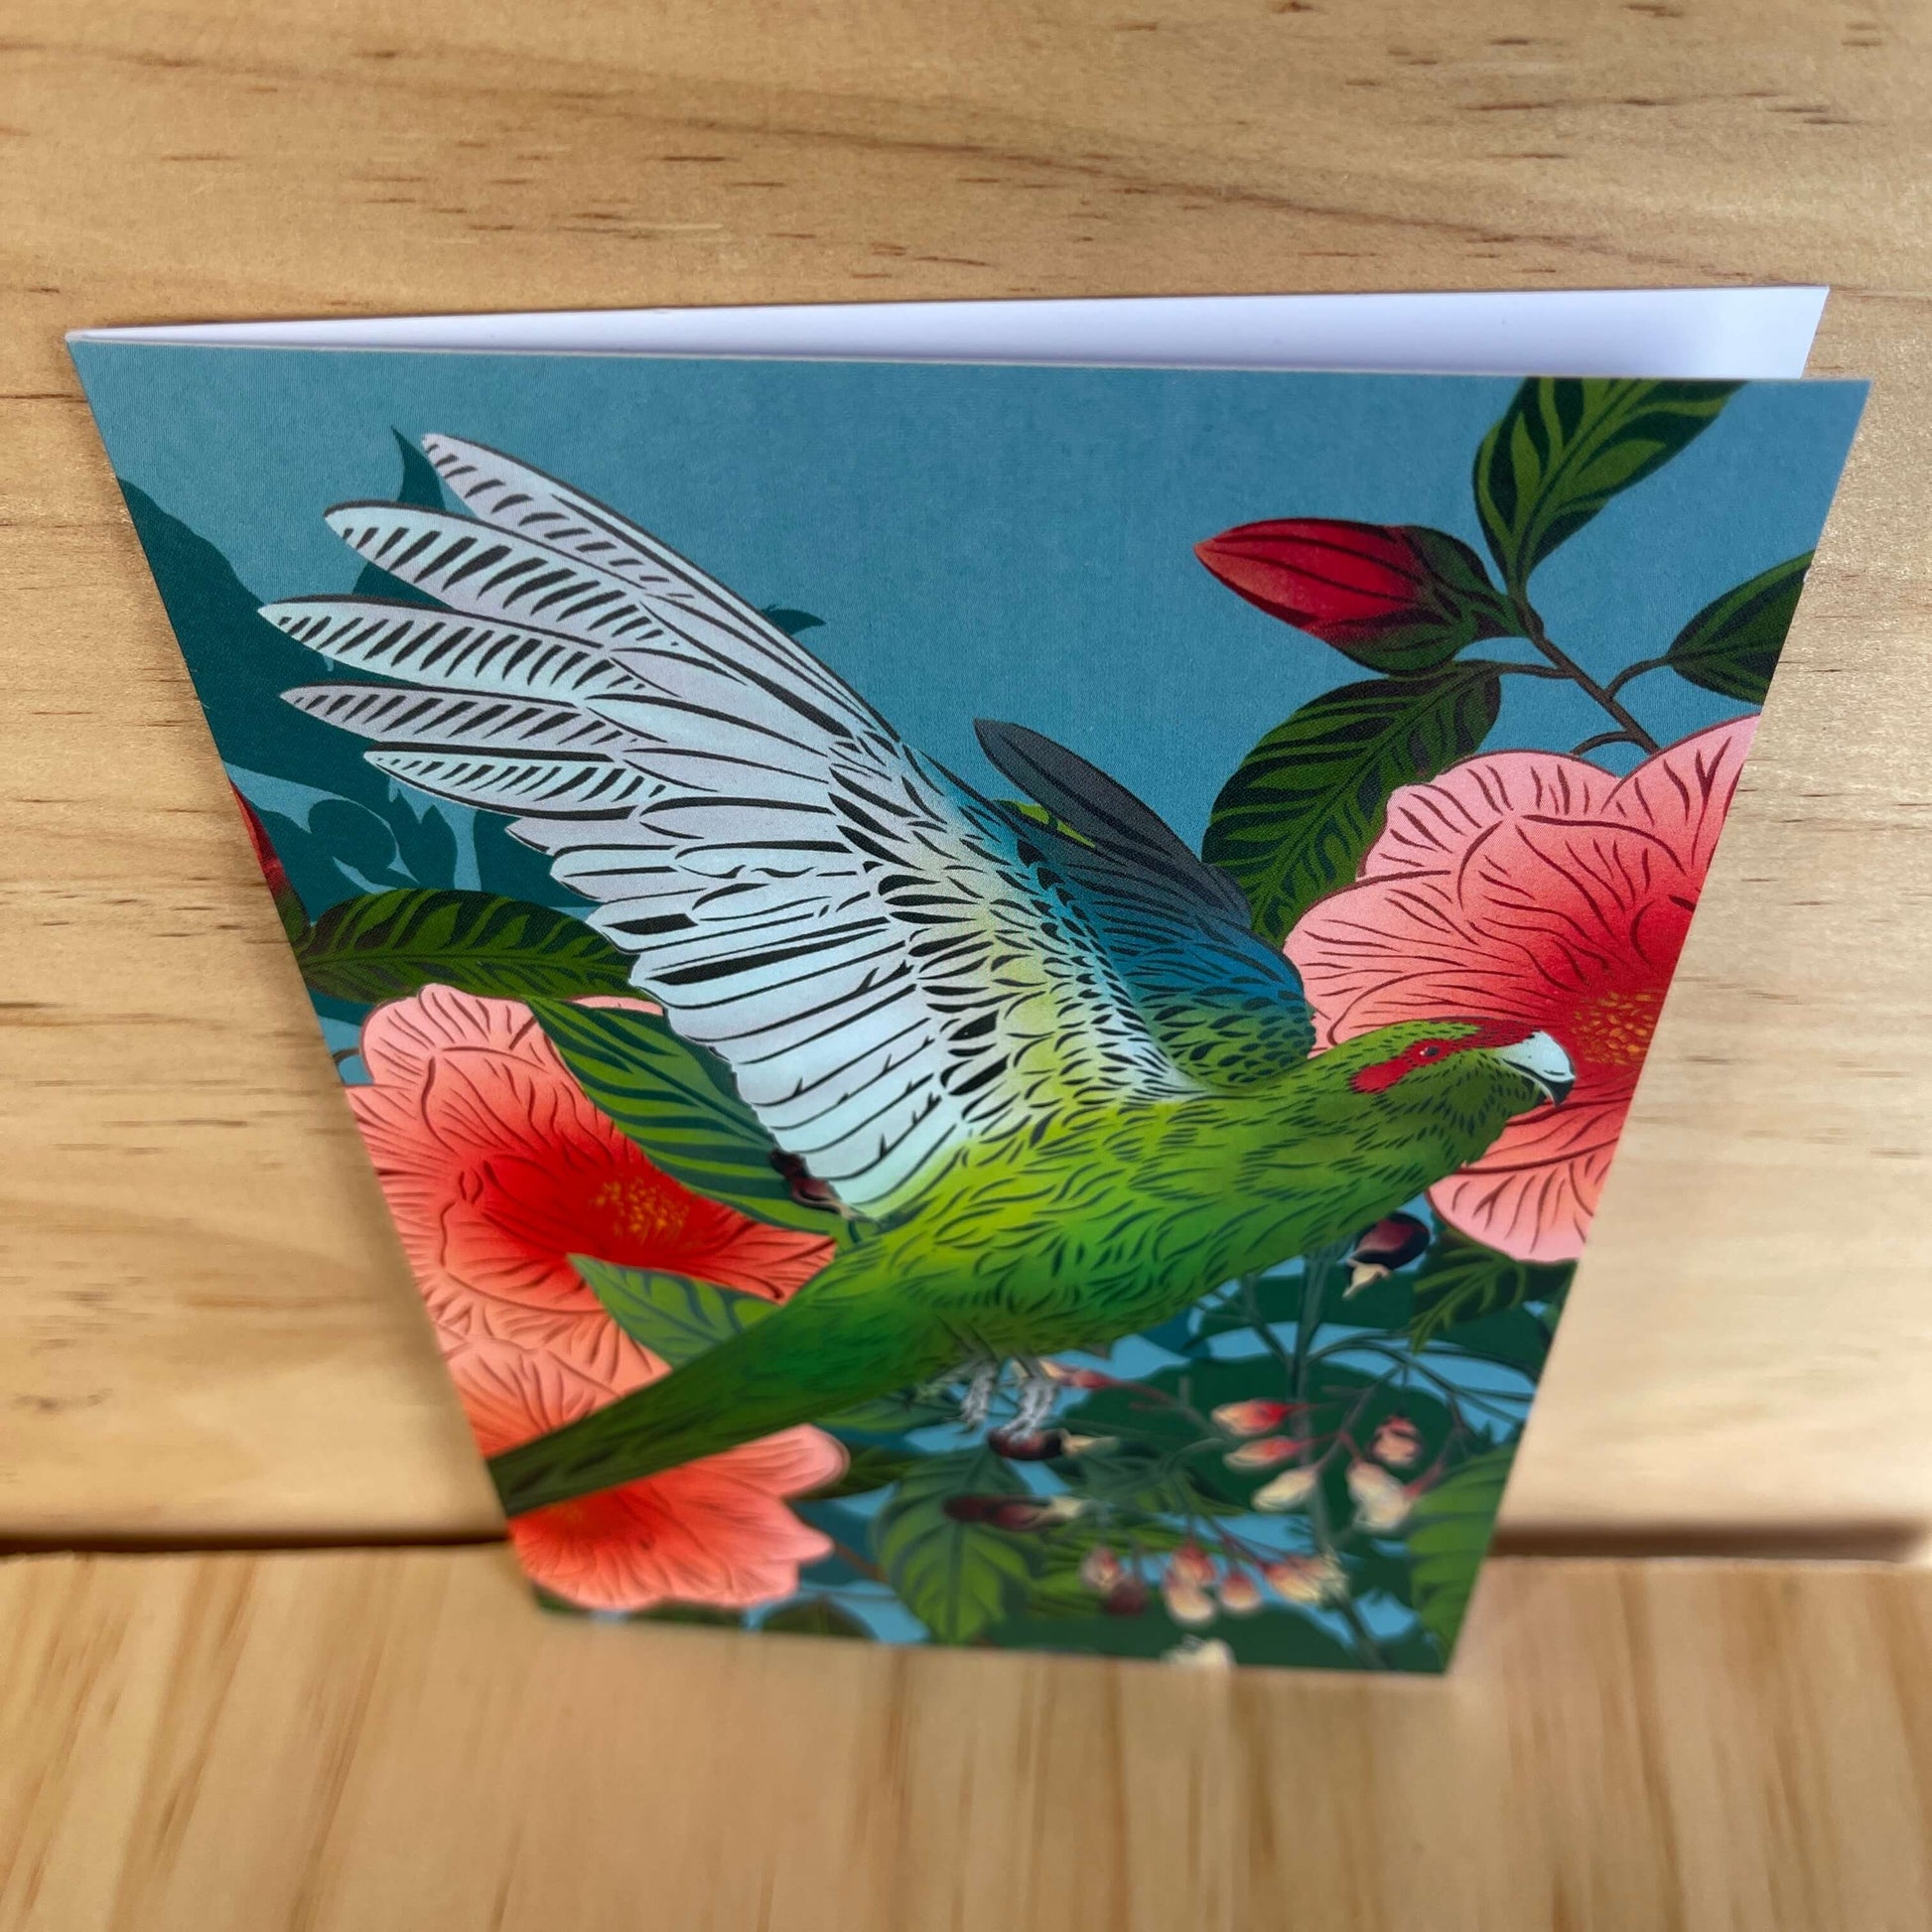 Greeting card by designer Flox featuring a Kakariki bird and Camellia flowers.